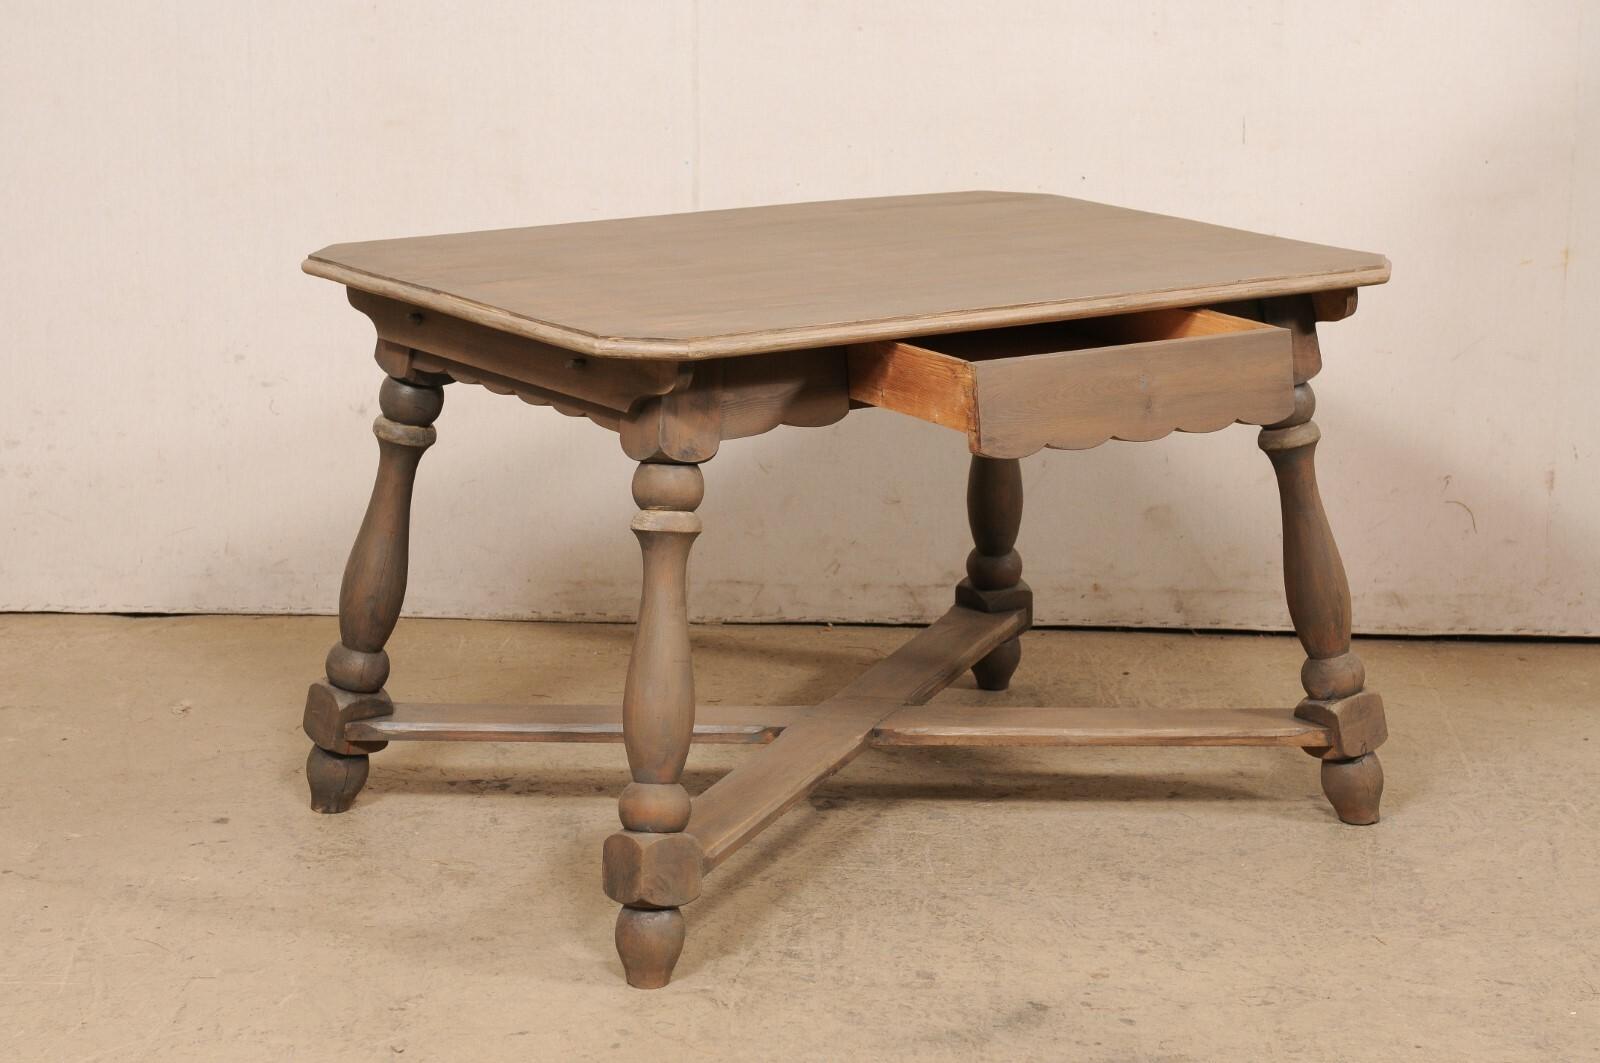 European Wooden Table w/Scalloped Apron, Nicely Turned Legs & X-Stretcher For Sale 1